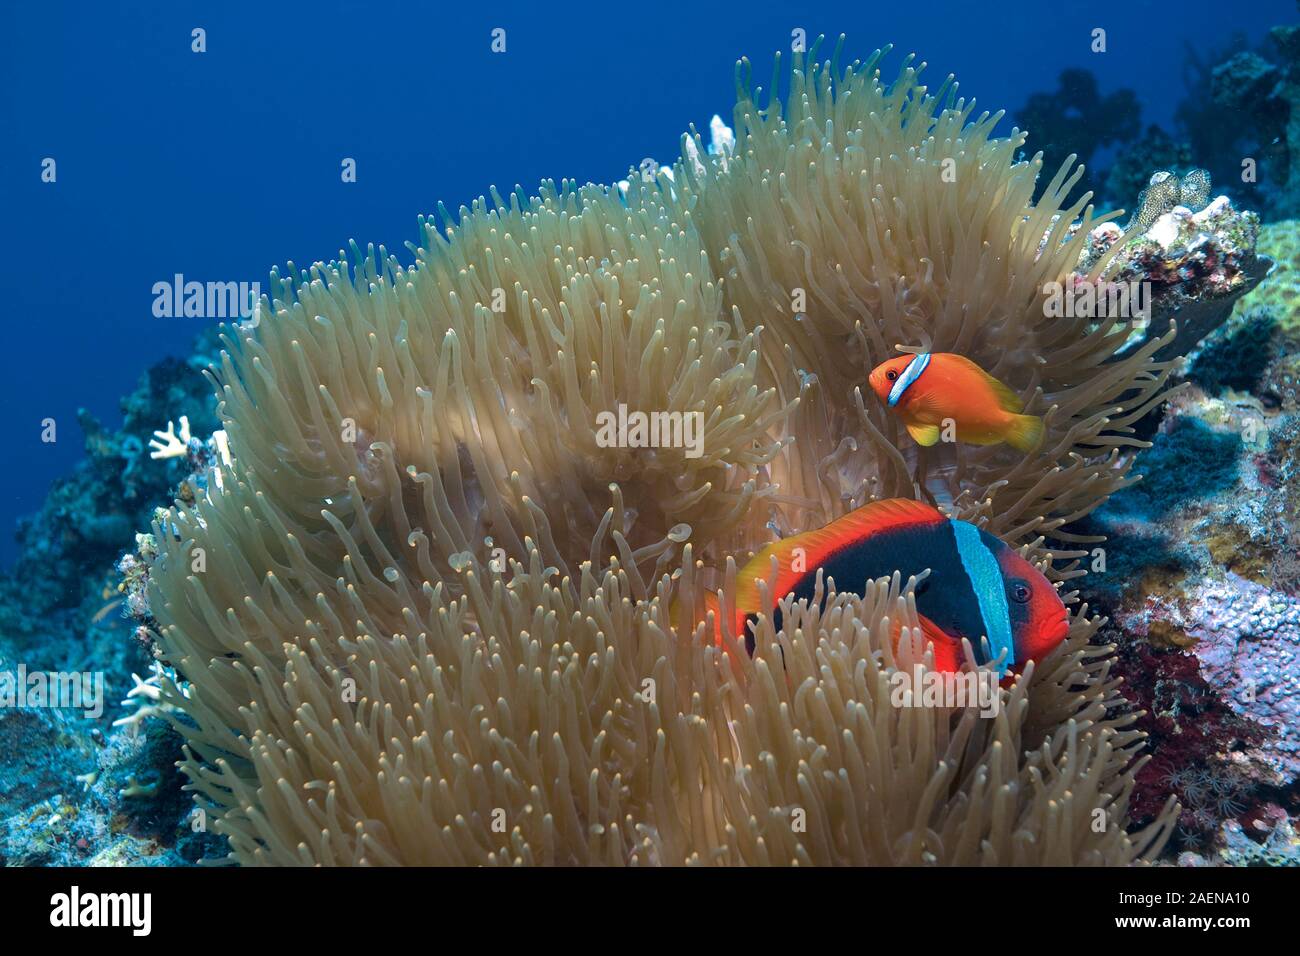 Redfin anemonefish or Bridled anemonefish (Amphiprion frenatus) lives in symbiose with the sea anemones, Sabang Beach, Mindoro, Philippines Stock Photo